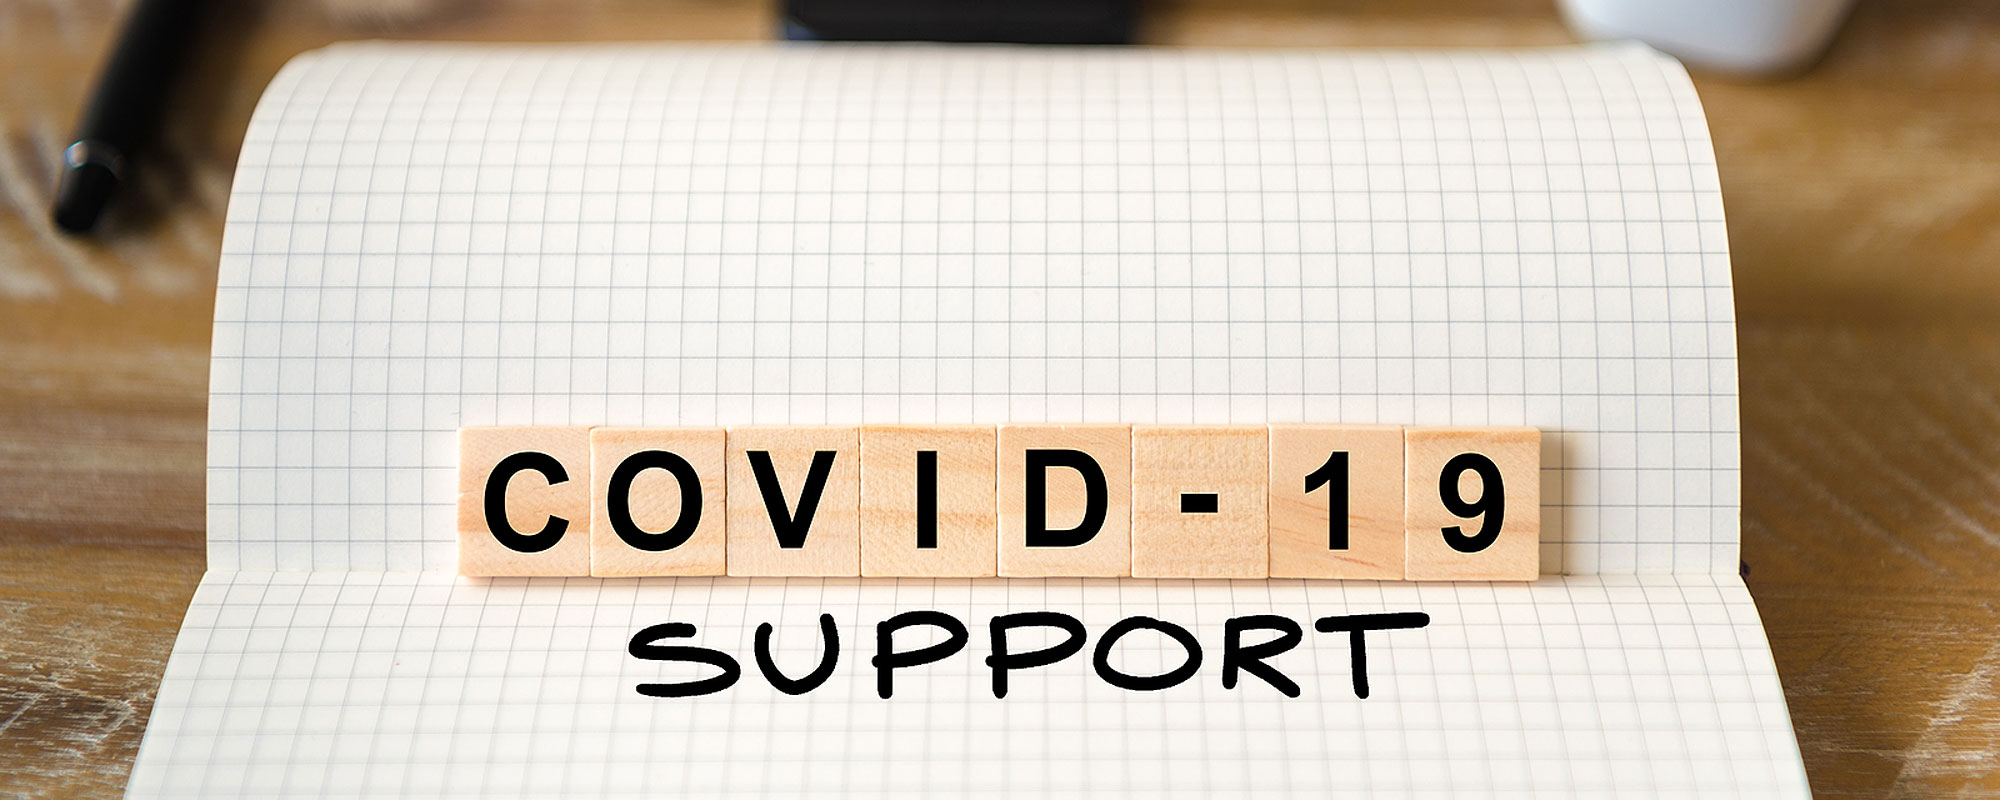 Covid-19 support.